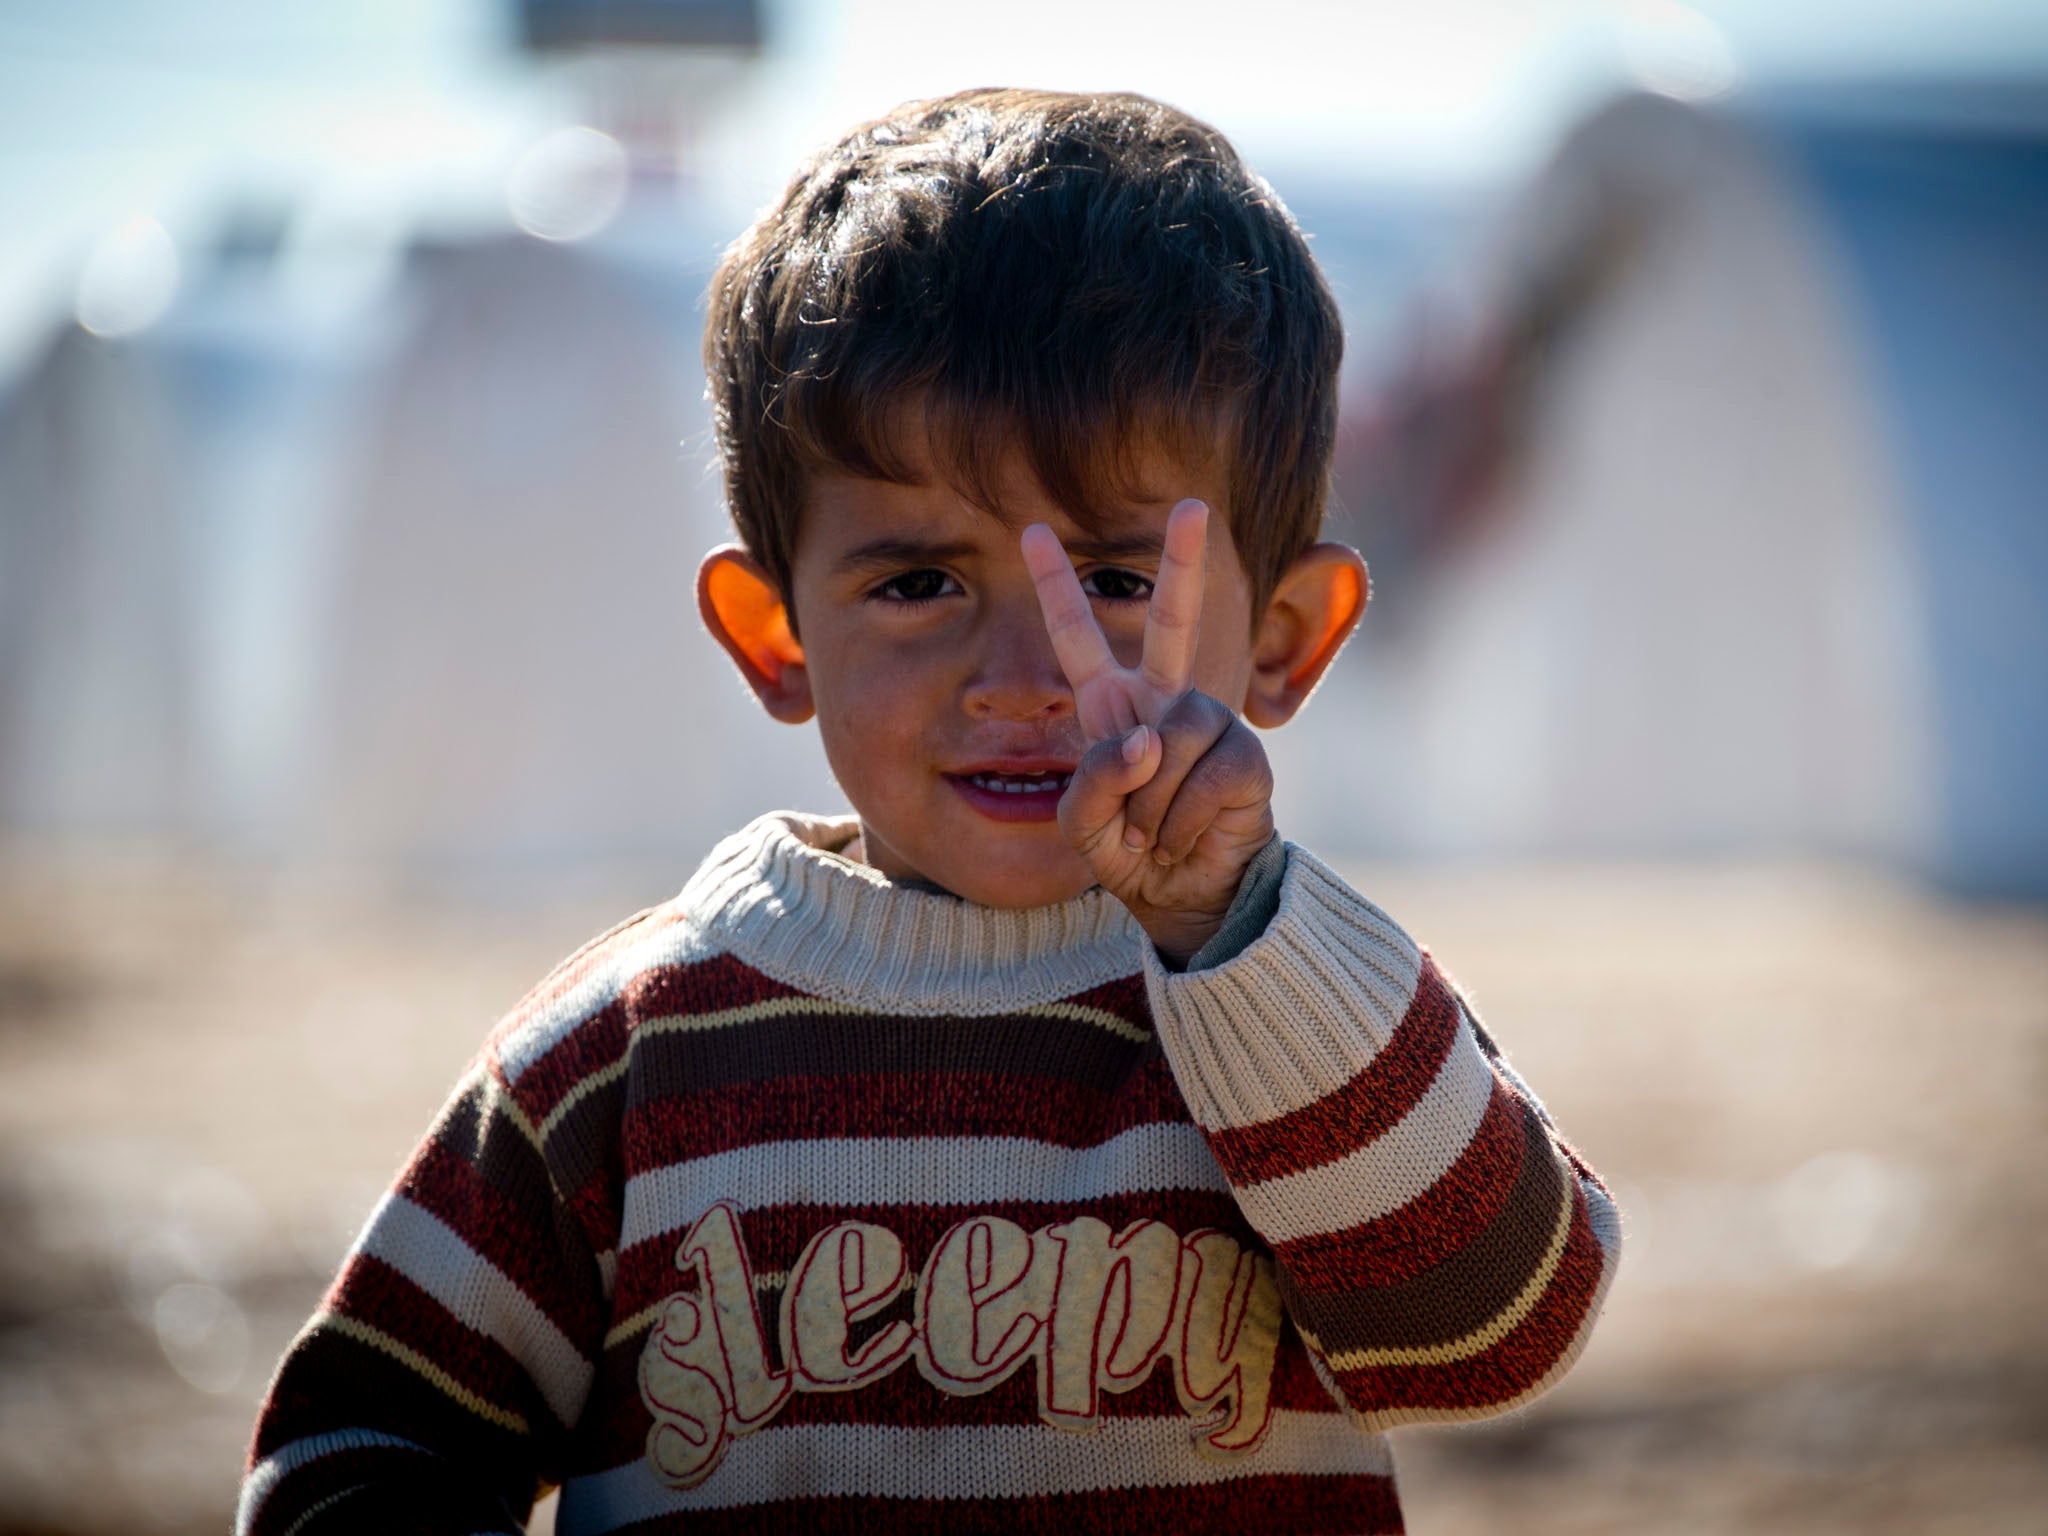 Syrian refugees face an uncertain future